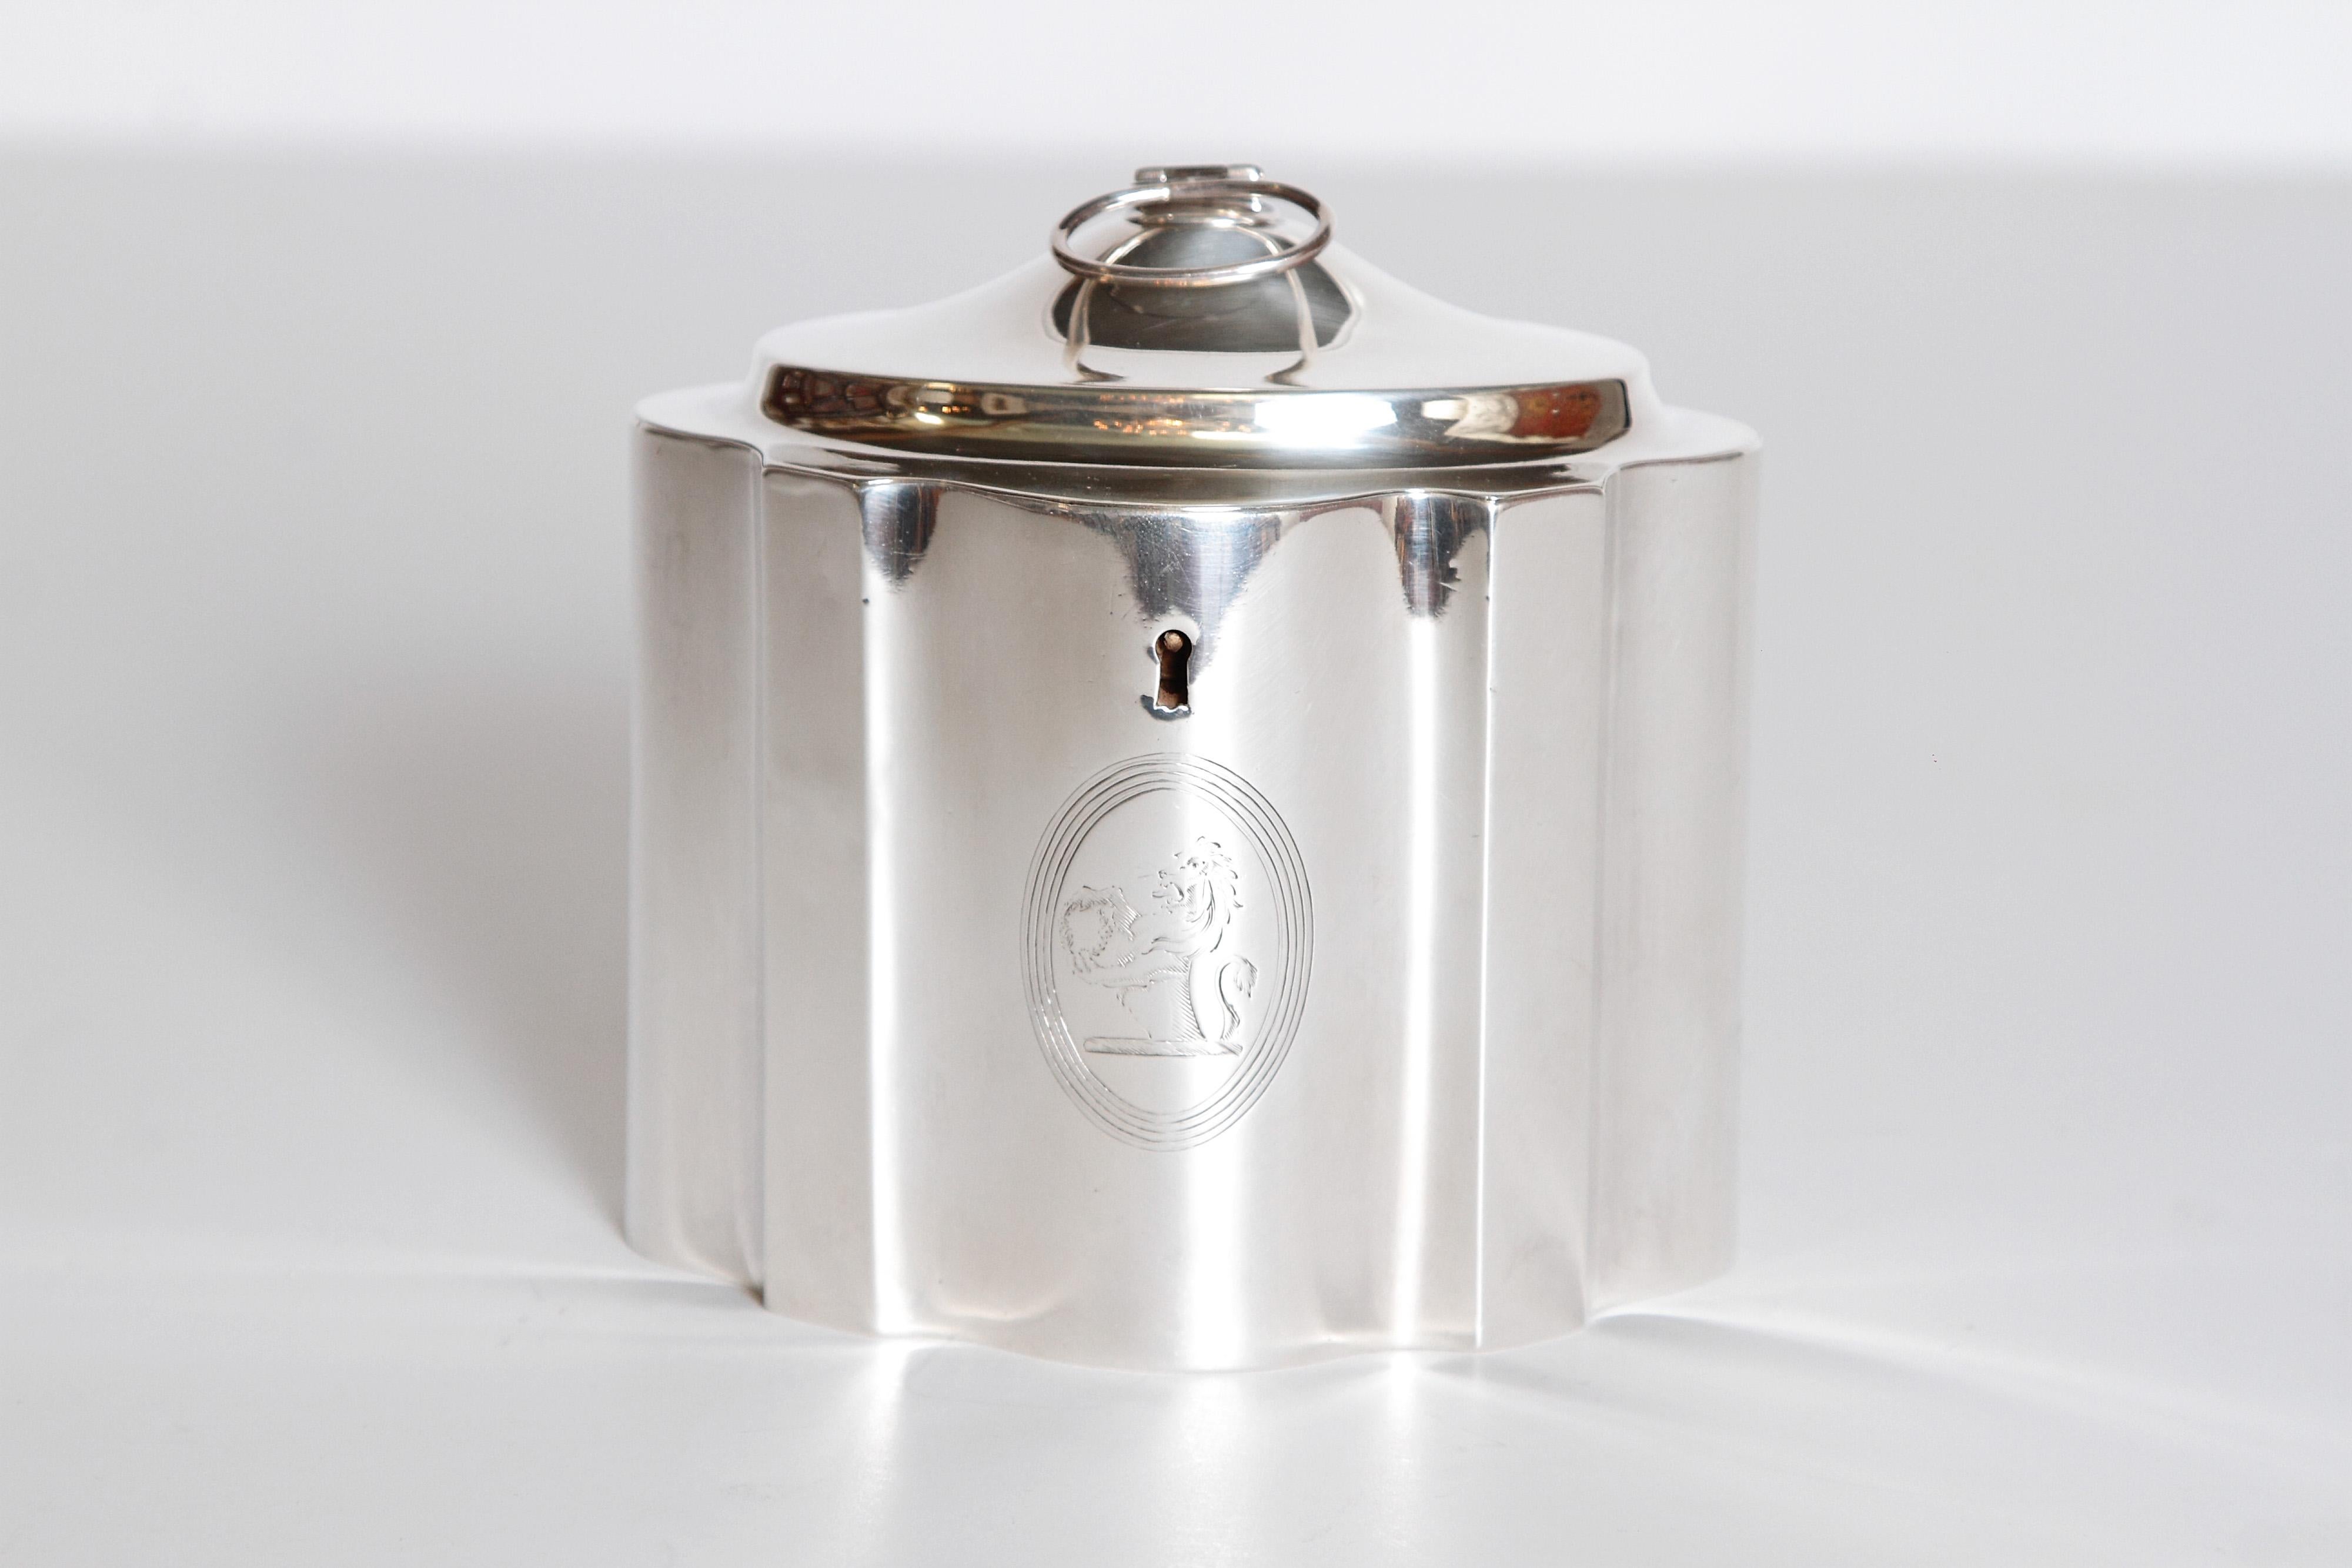 An English sterling tea caddy with scalloped lid and body. The lid has a ring pull. An engraved lion on the front side. Hallmarks on base.